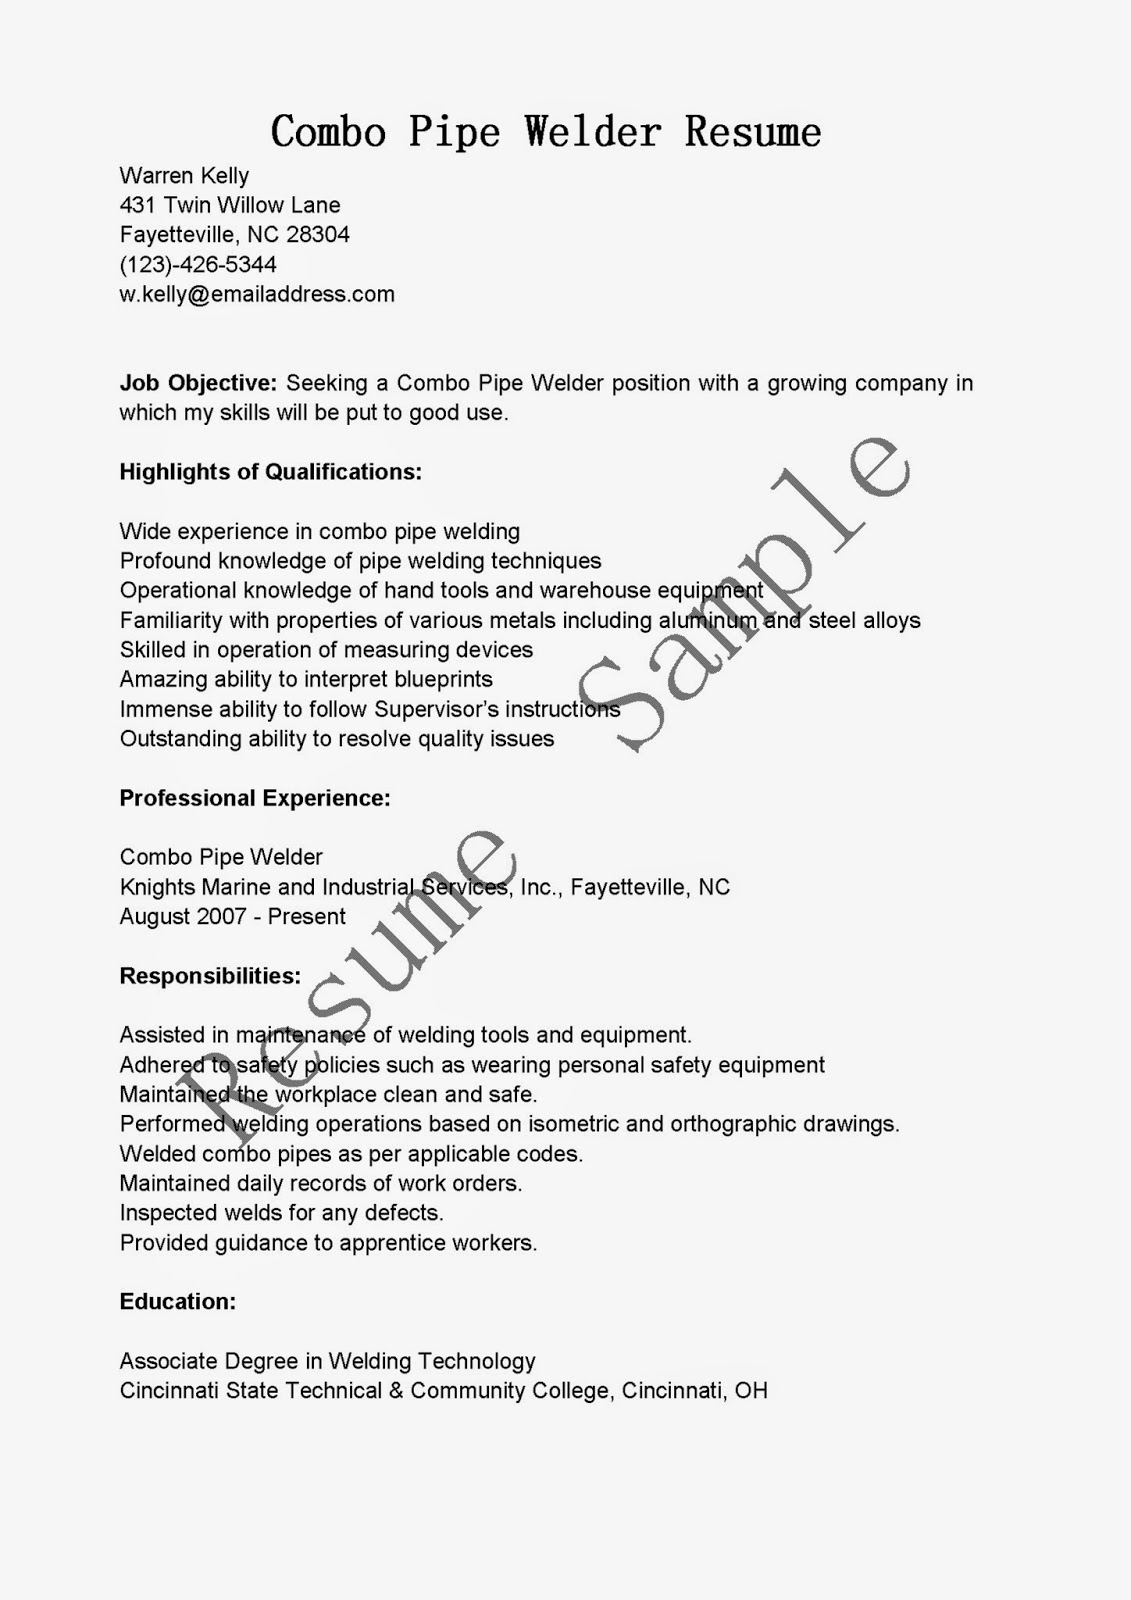 Resume templates can copy paste